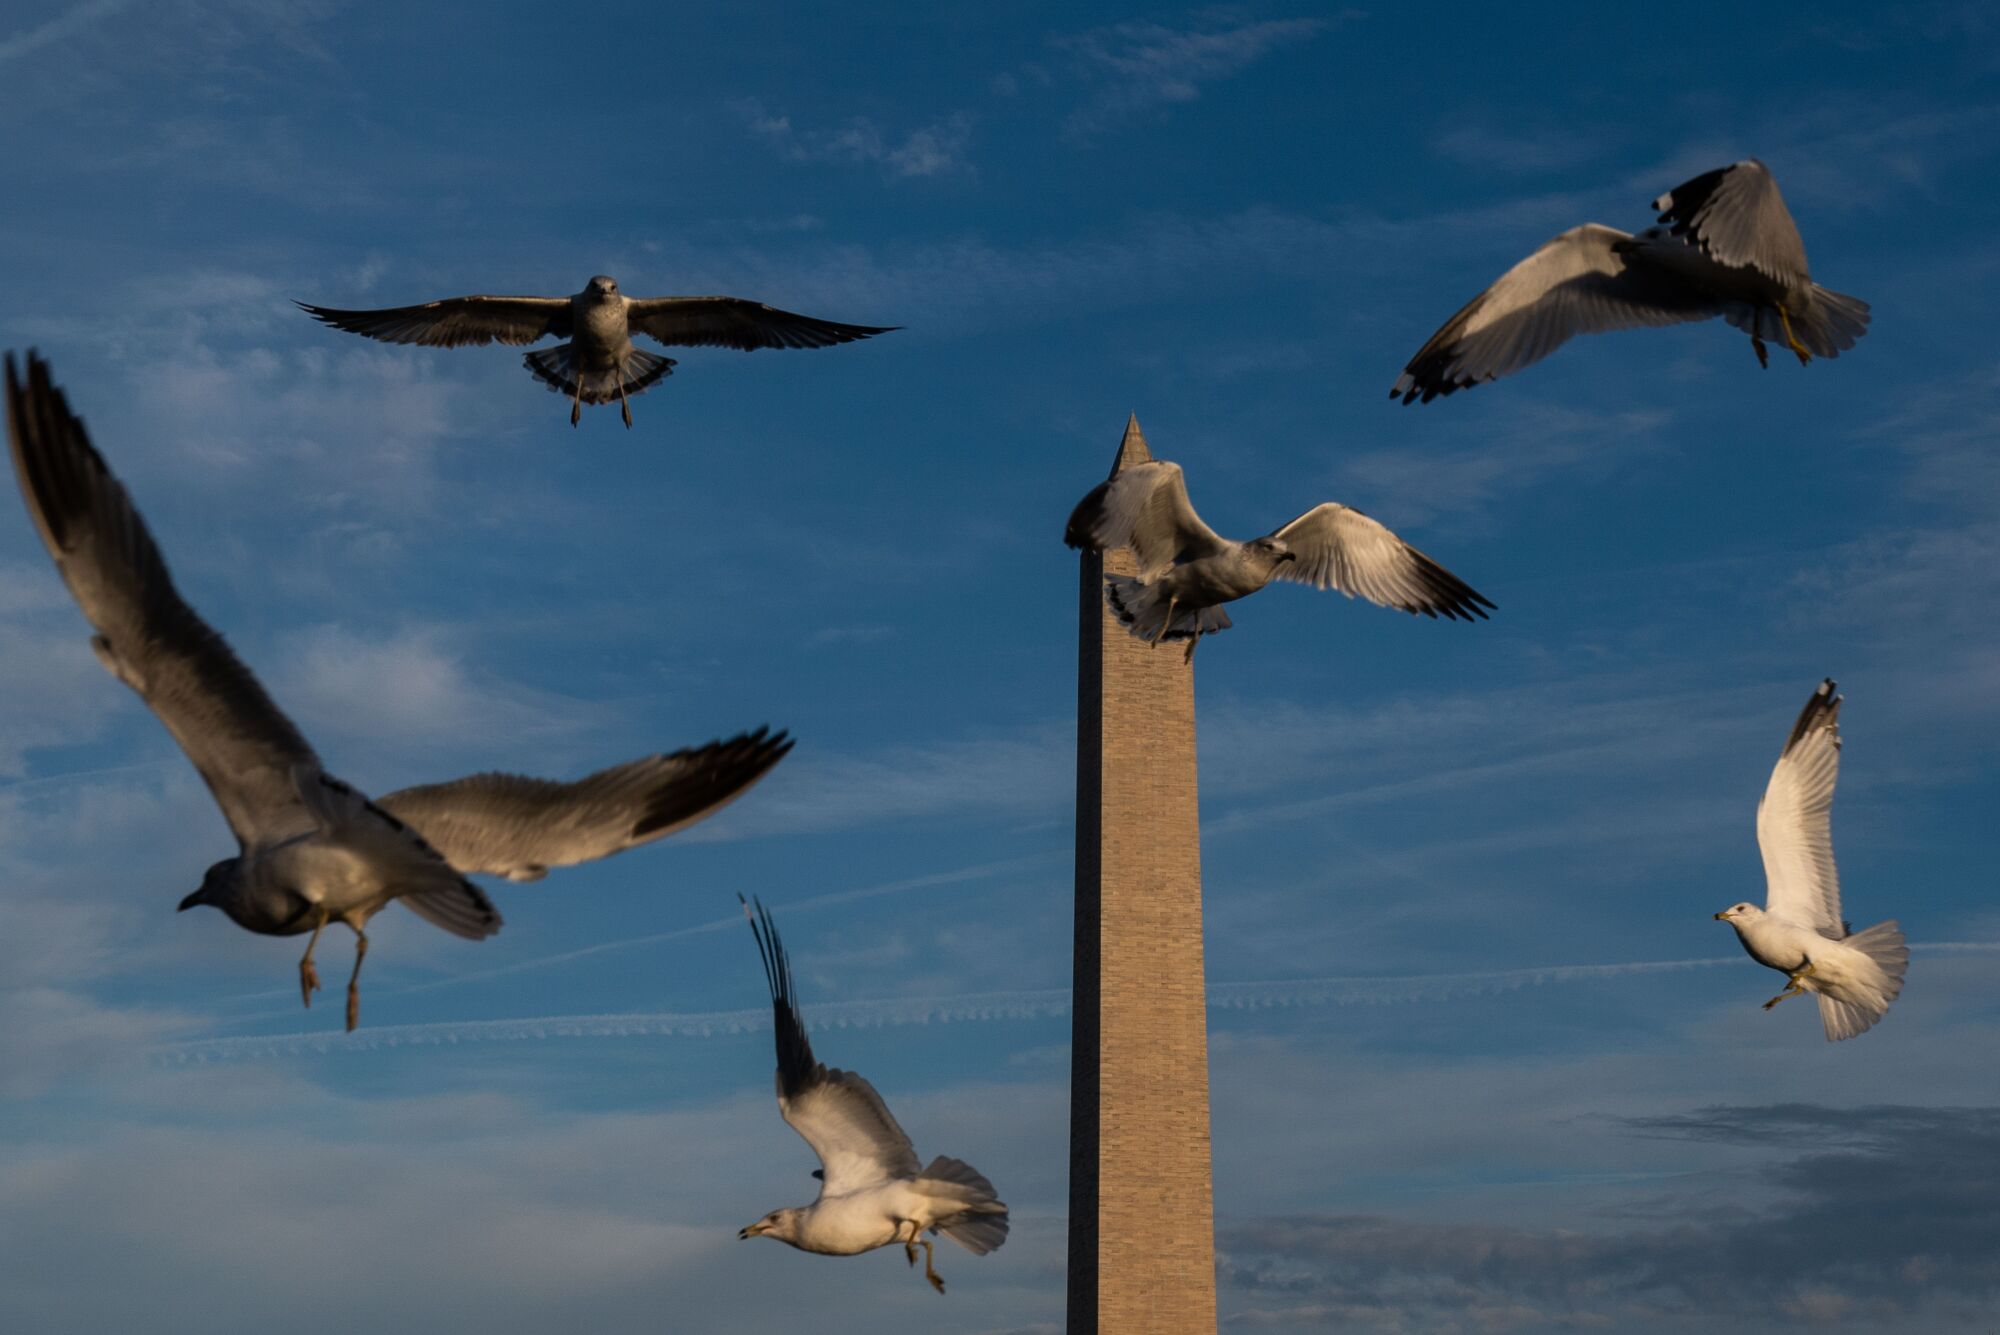 Birds in flight over Constitution Gardens Pond with the Washington Monument in the background.